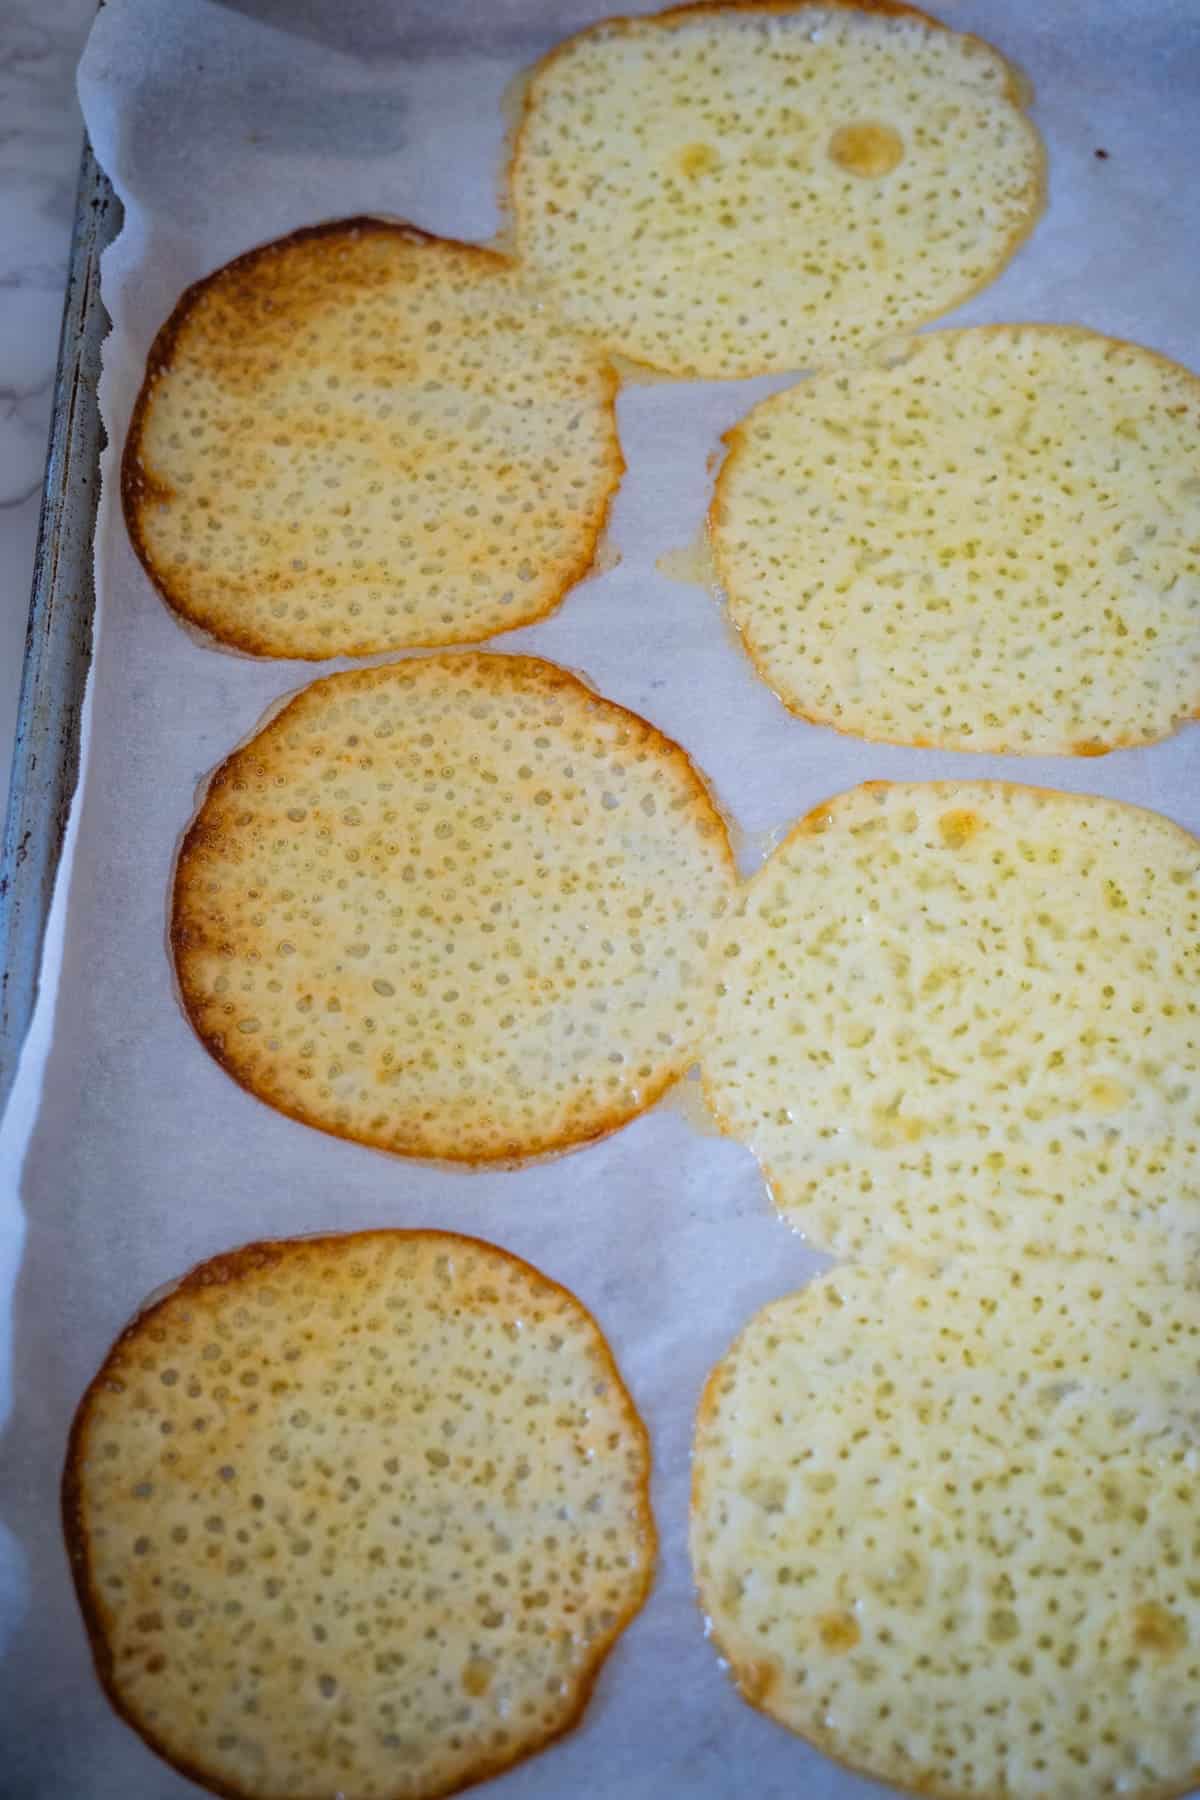 Thin, crispy cheese crisps cooling on parchment paper with a light golden color and visible porous texture.